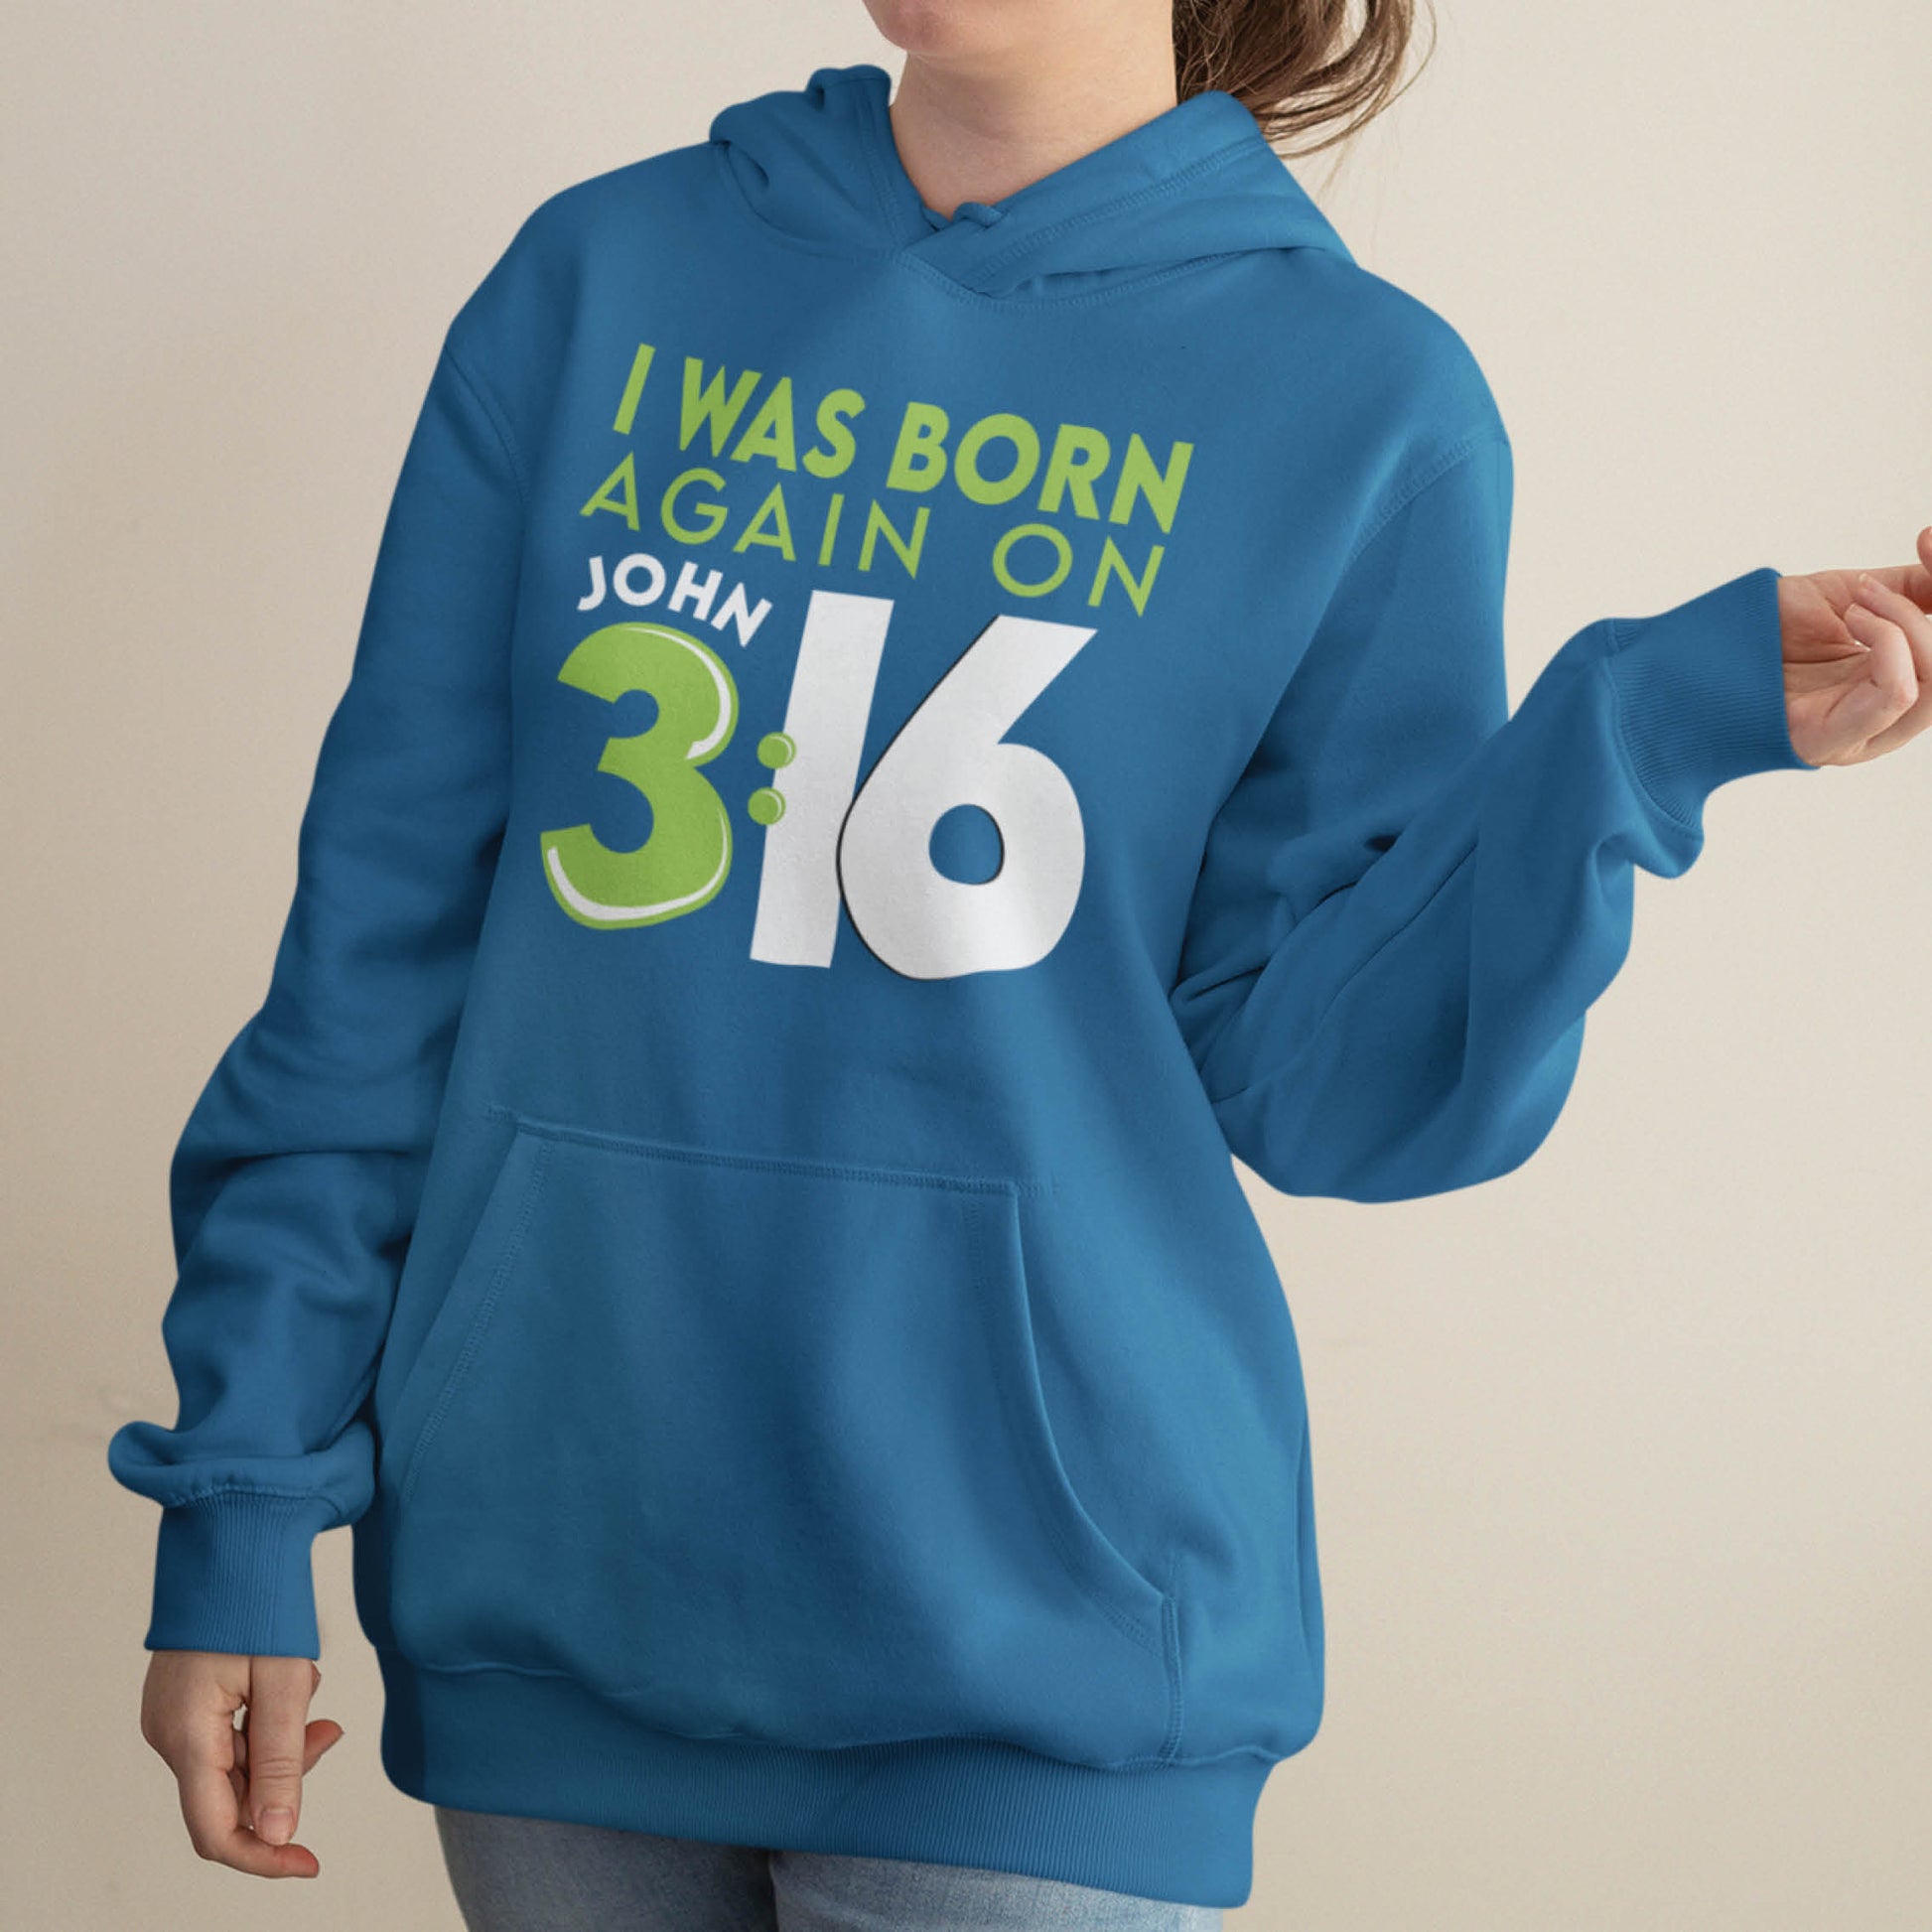 trendy young lady wearing indigo blue Unisex Cozy Hoodie with Christian aesthetic bible verse message that says, "I Was Born Again On John 3:16" bible verse quote in lime green and white for men and women